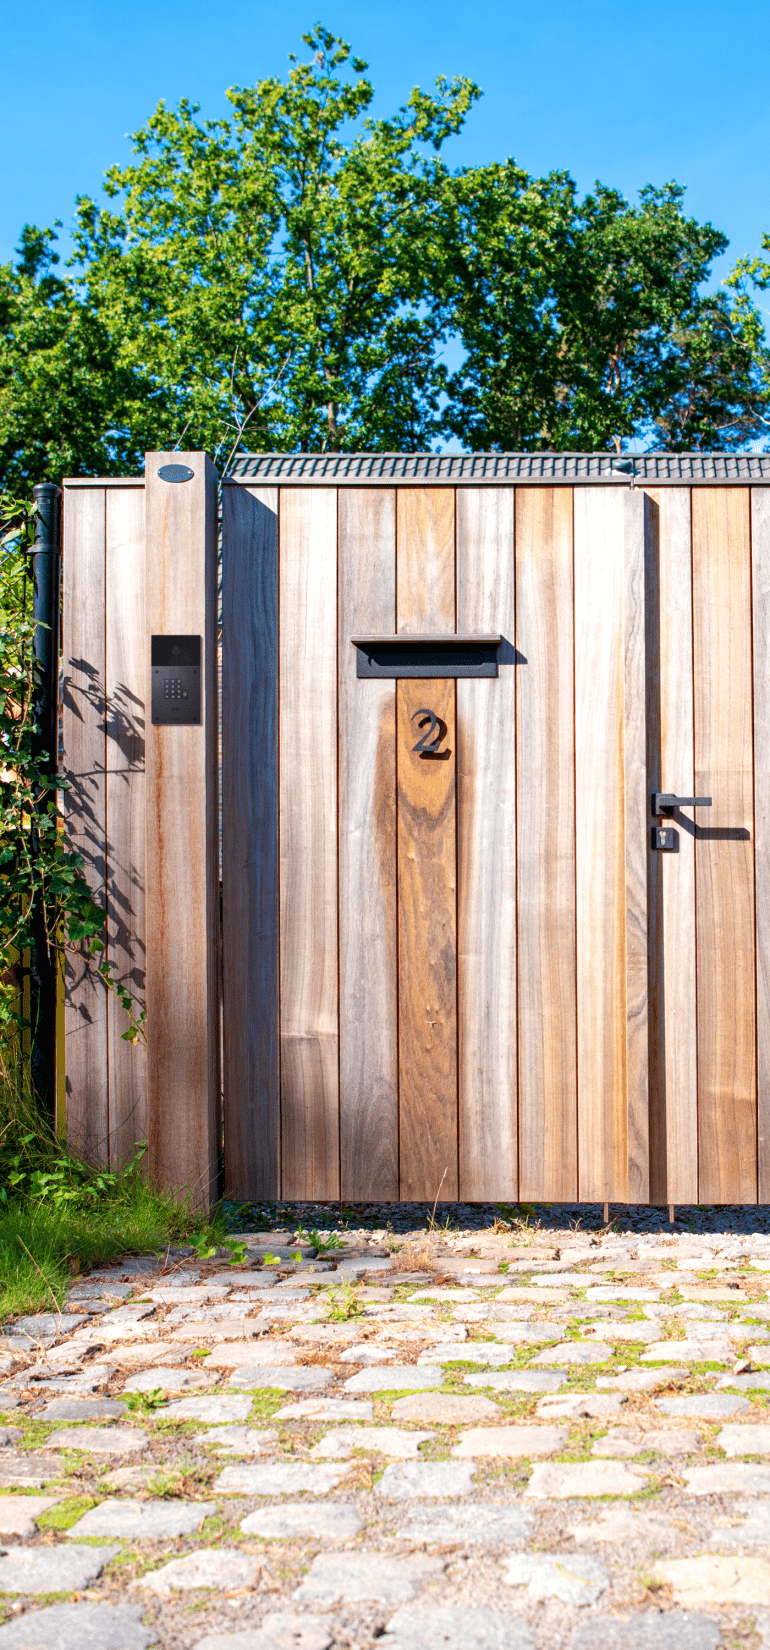 A wooden garden door with an intercom system and an integrated mail box and house number